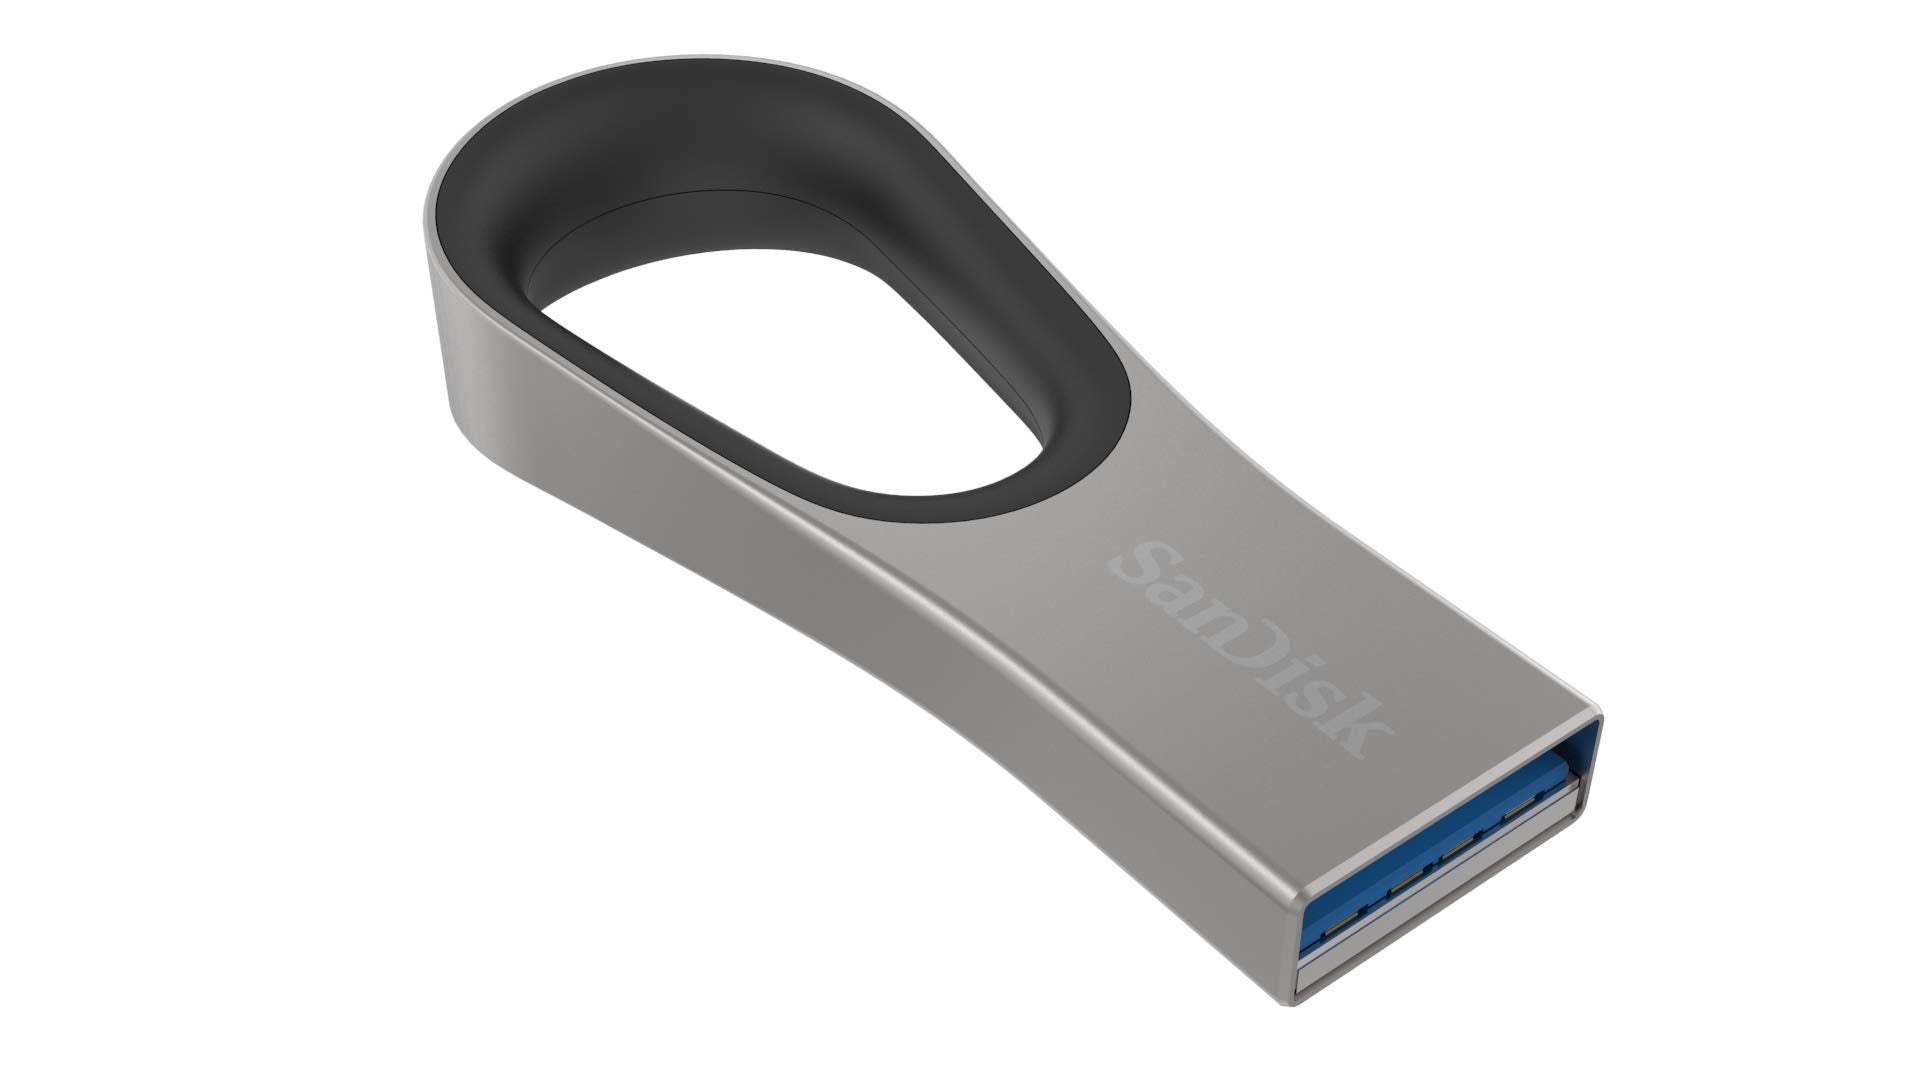 SanDisk 64GB Ultra Loop USB 3.0 Flash Drive - SDCZ93-064G-G46, Pack of 5